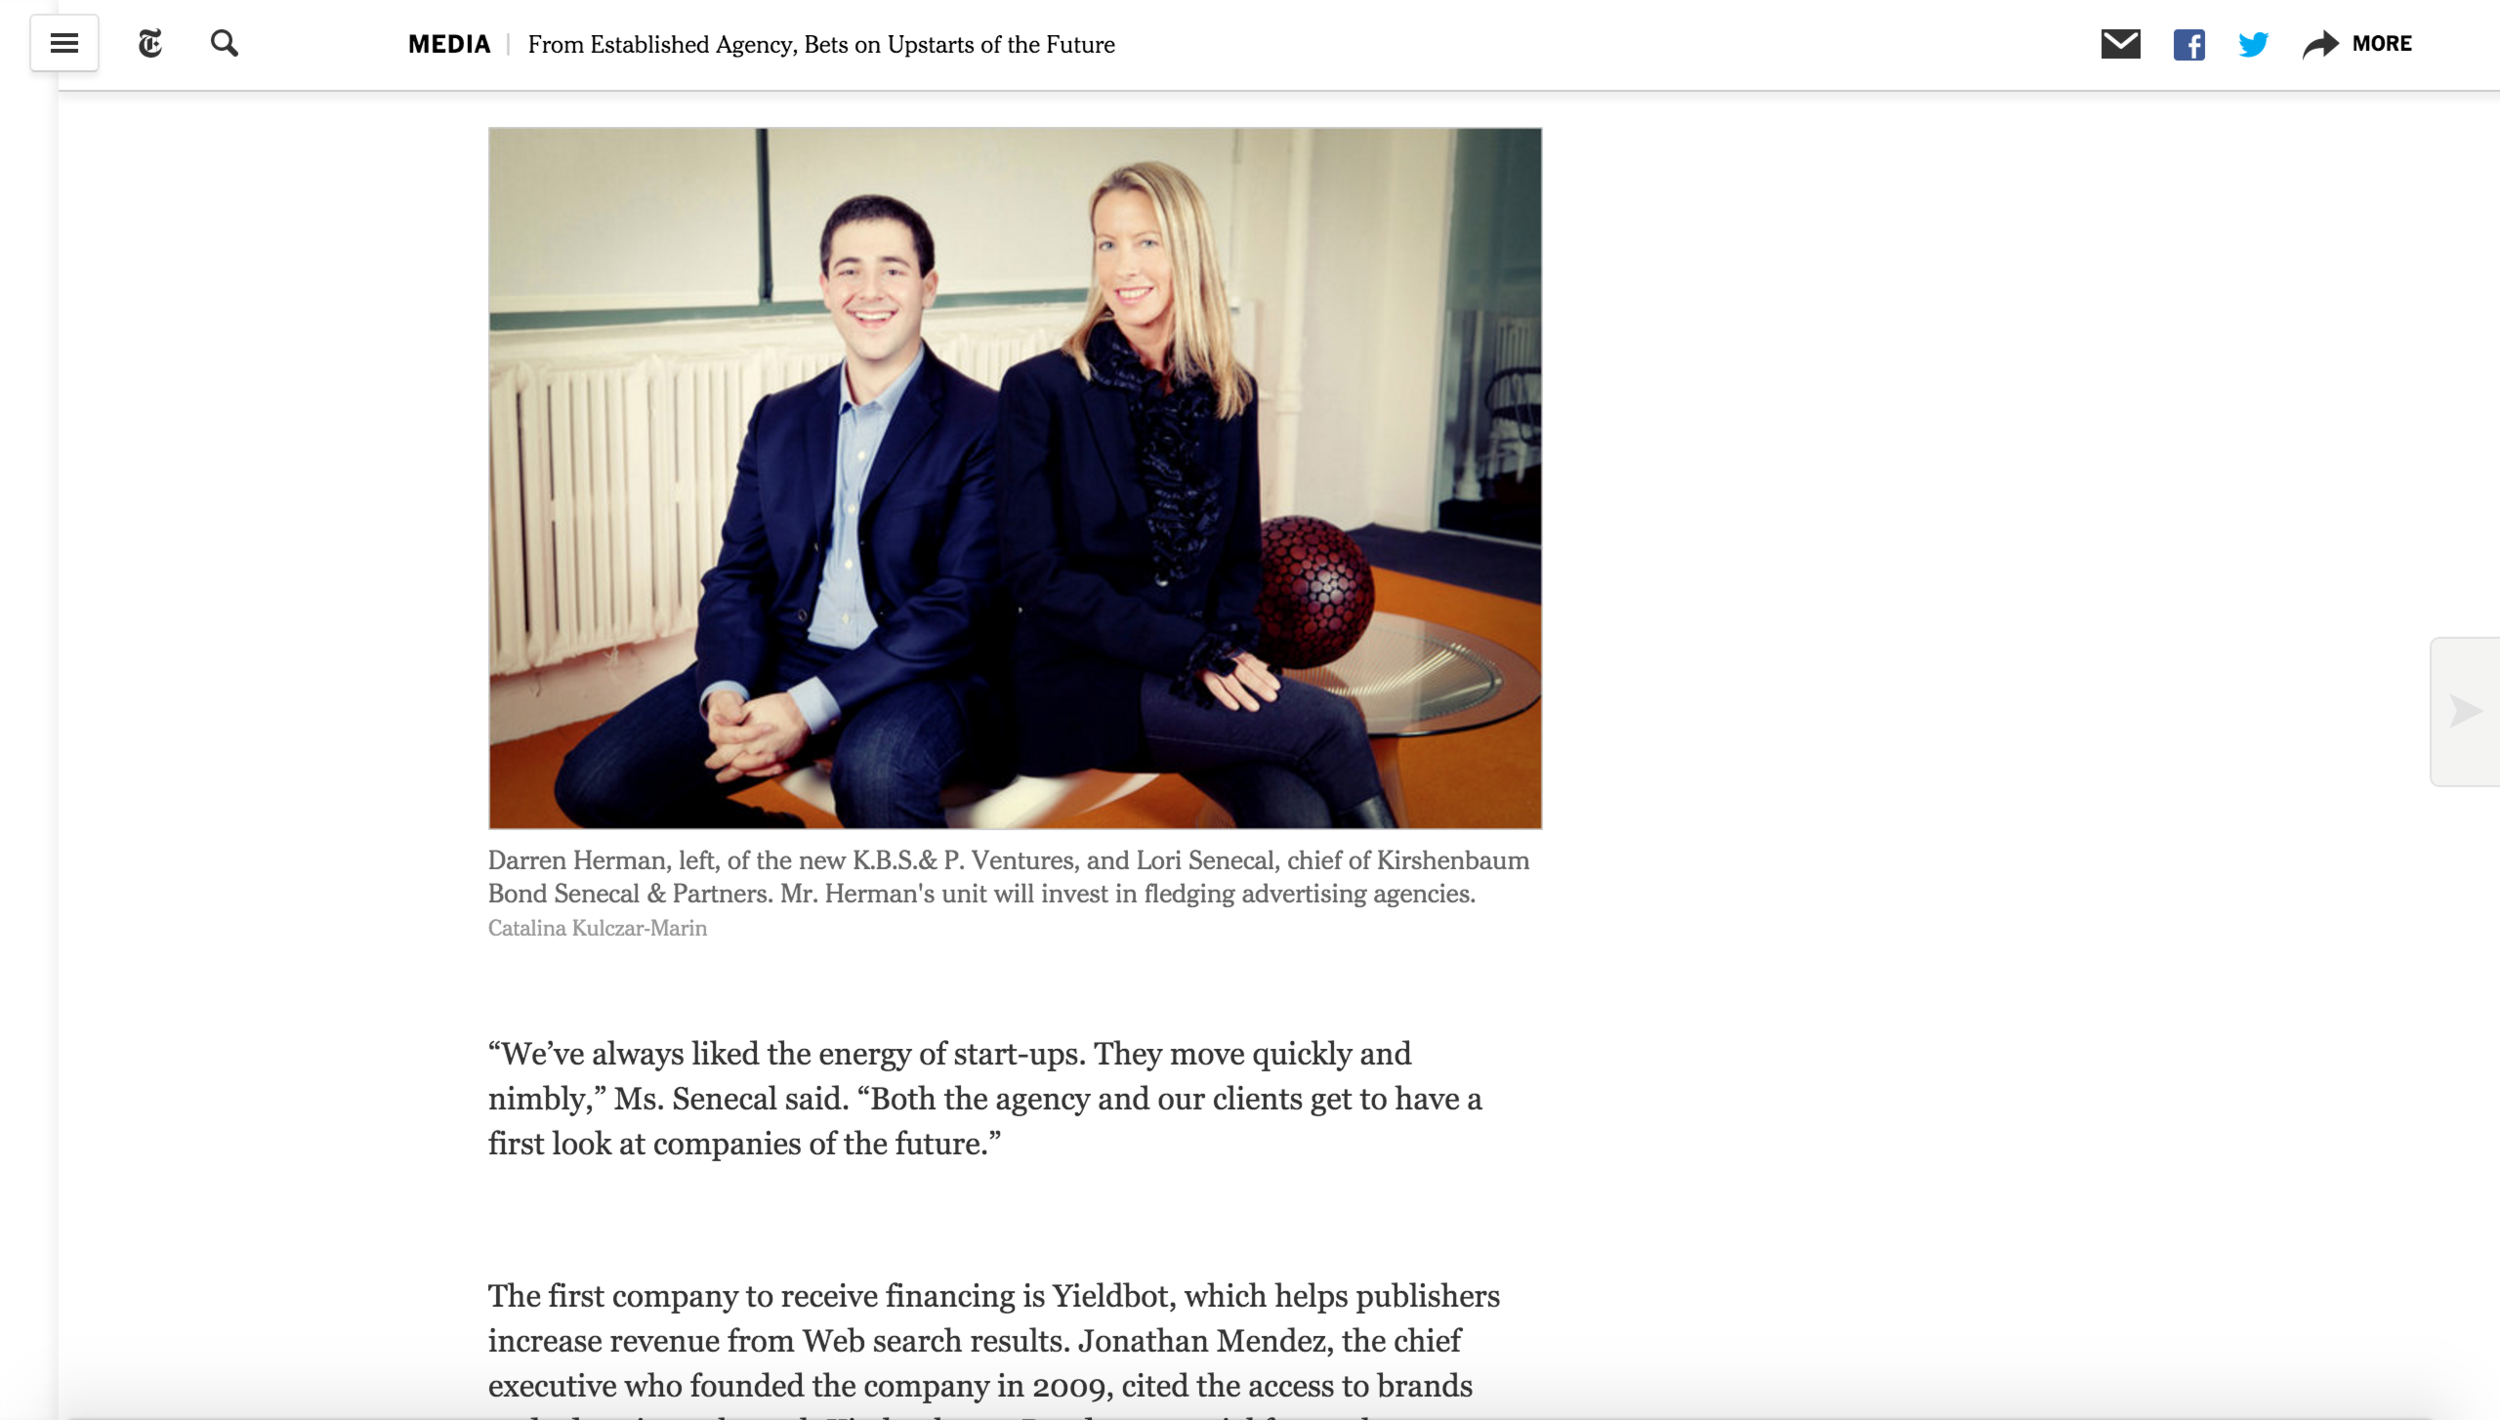 The New York Times:&nbsp;From Established Agency, Bets on Upstarts of the Future